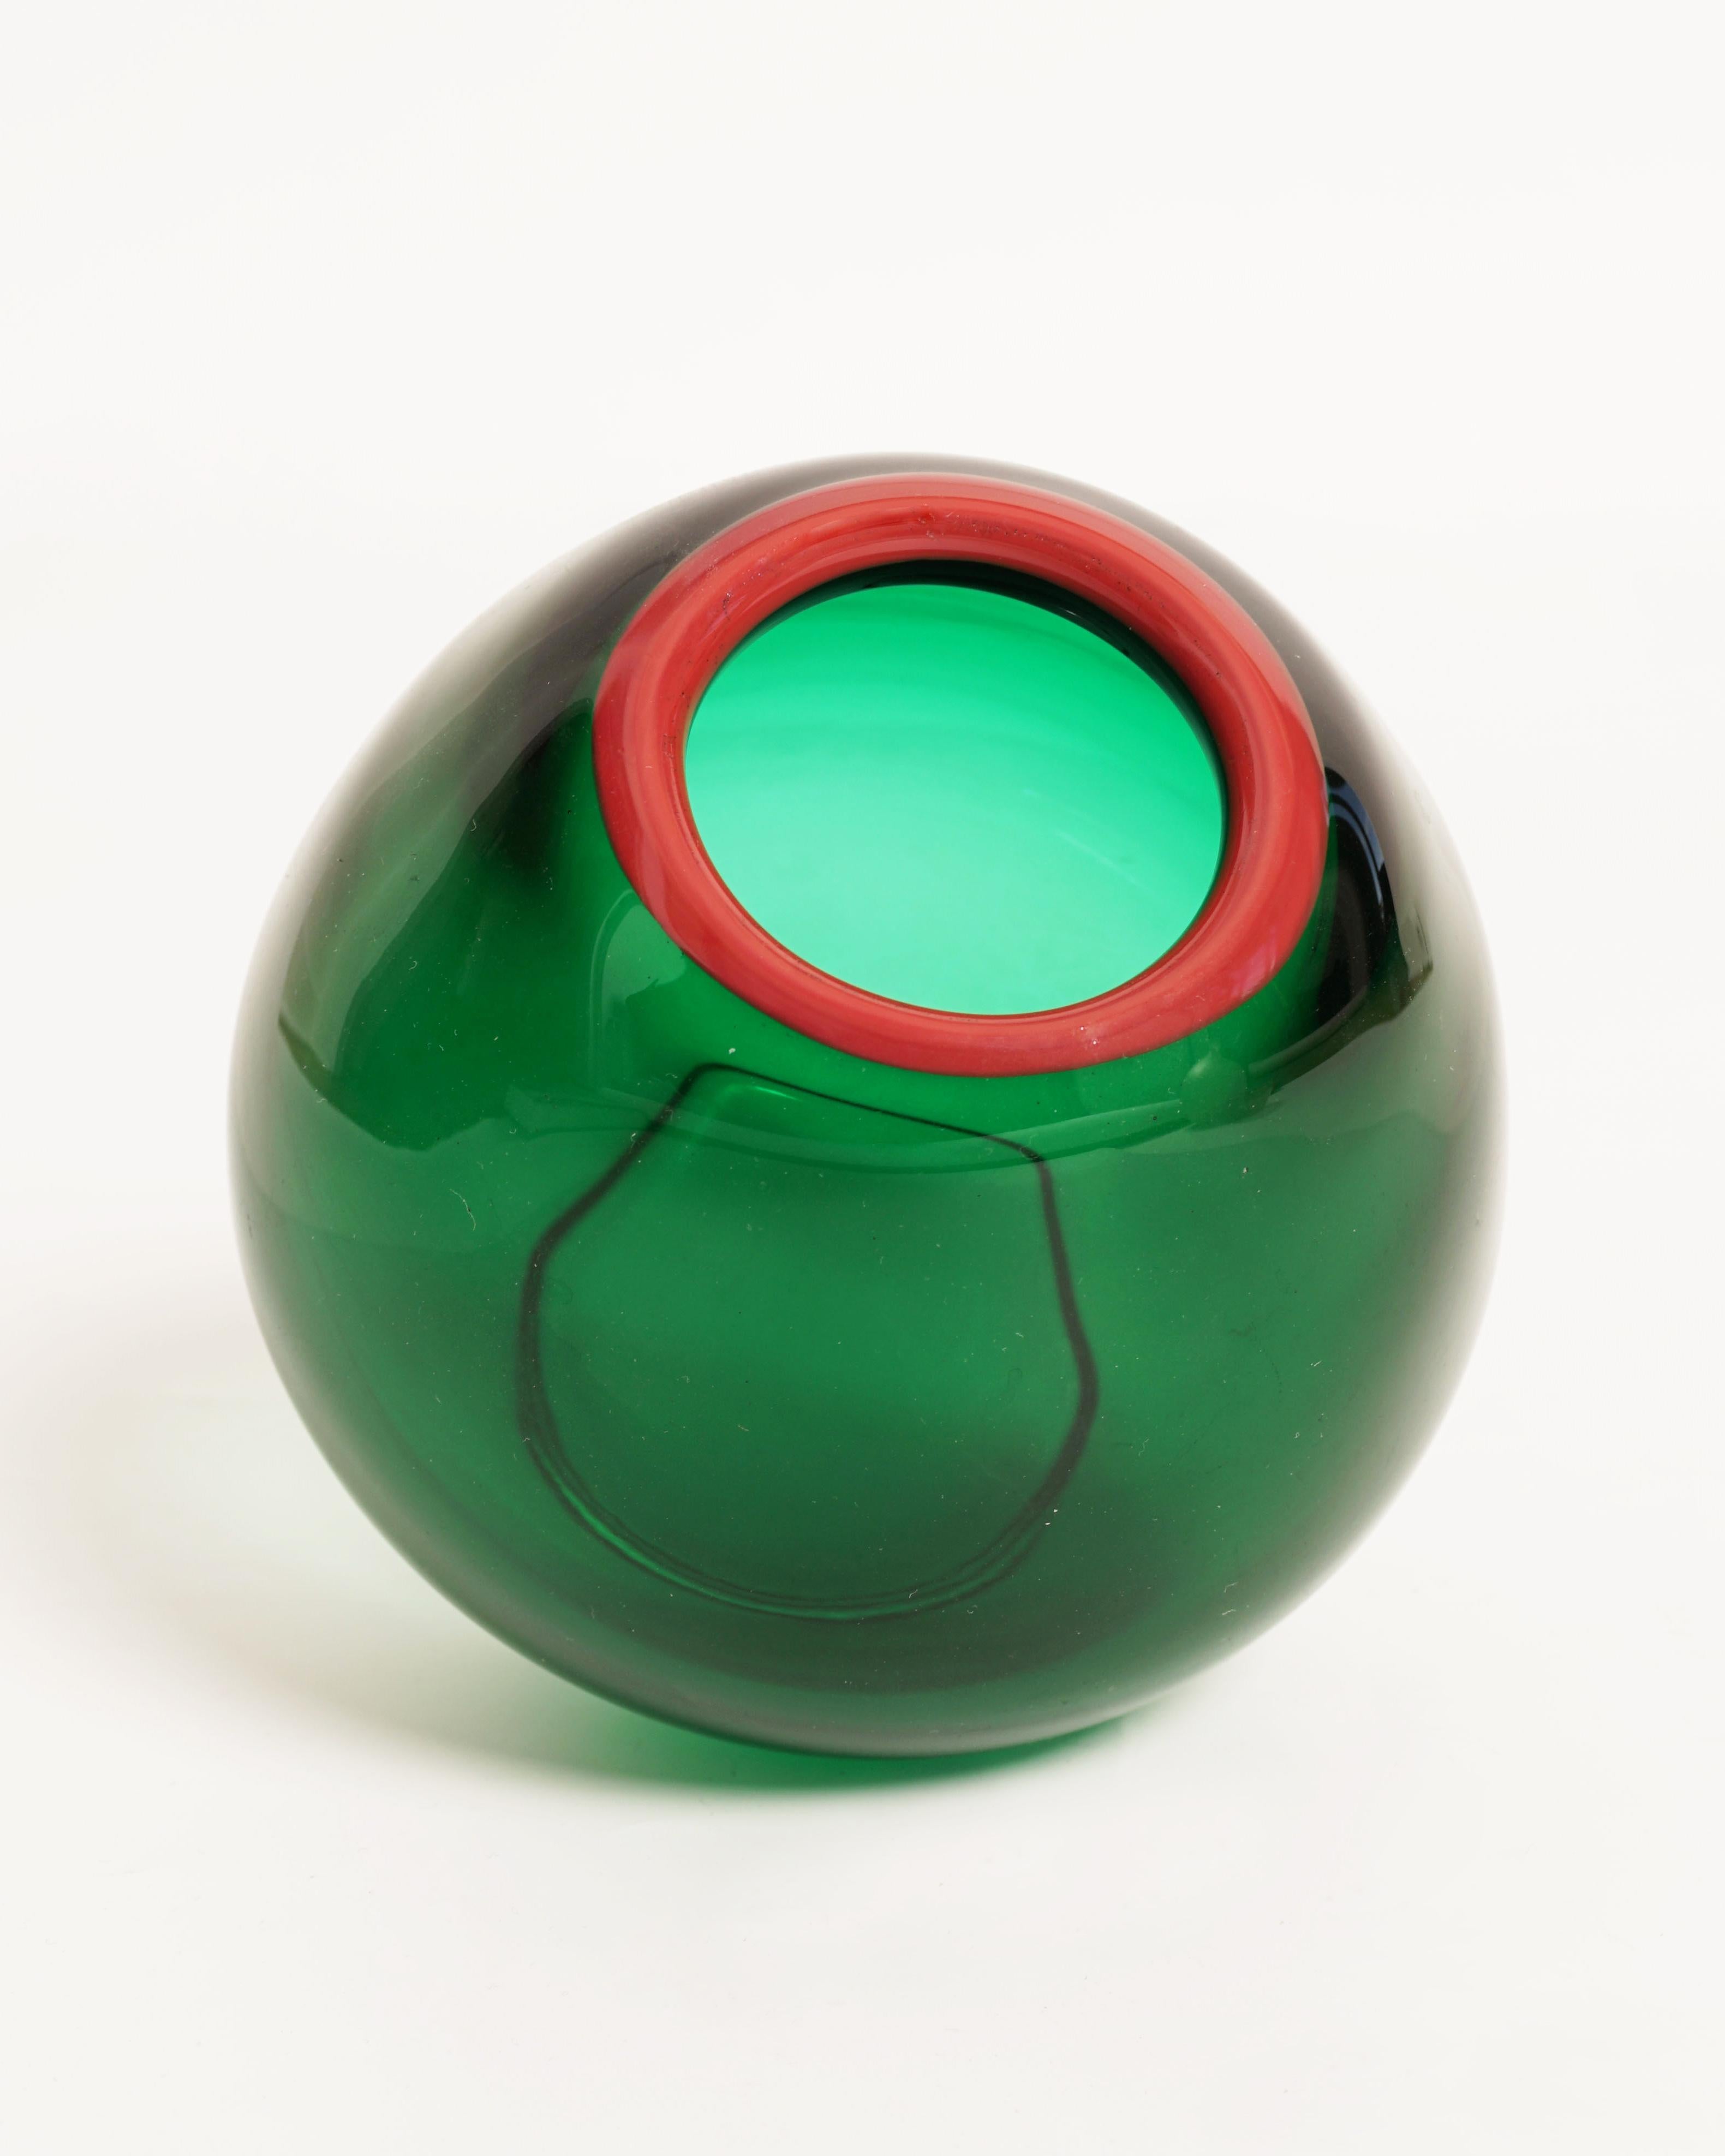 Execution: Blown glass, green and red
Not signed
H : 11 cm (4.3